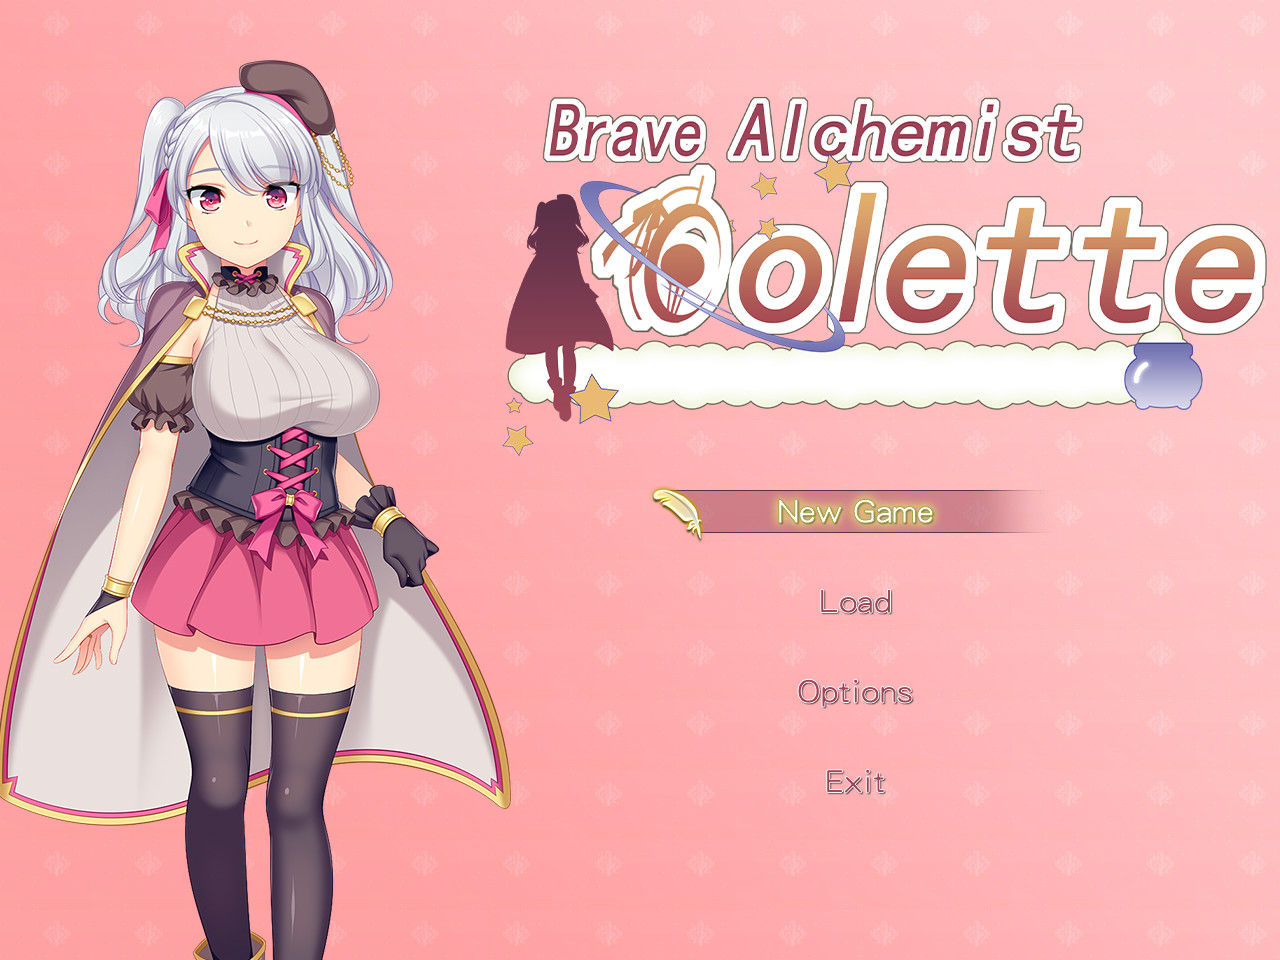 Find the best computers for Brave Alchemist Colette